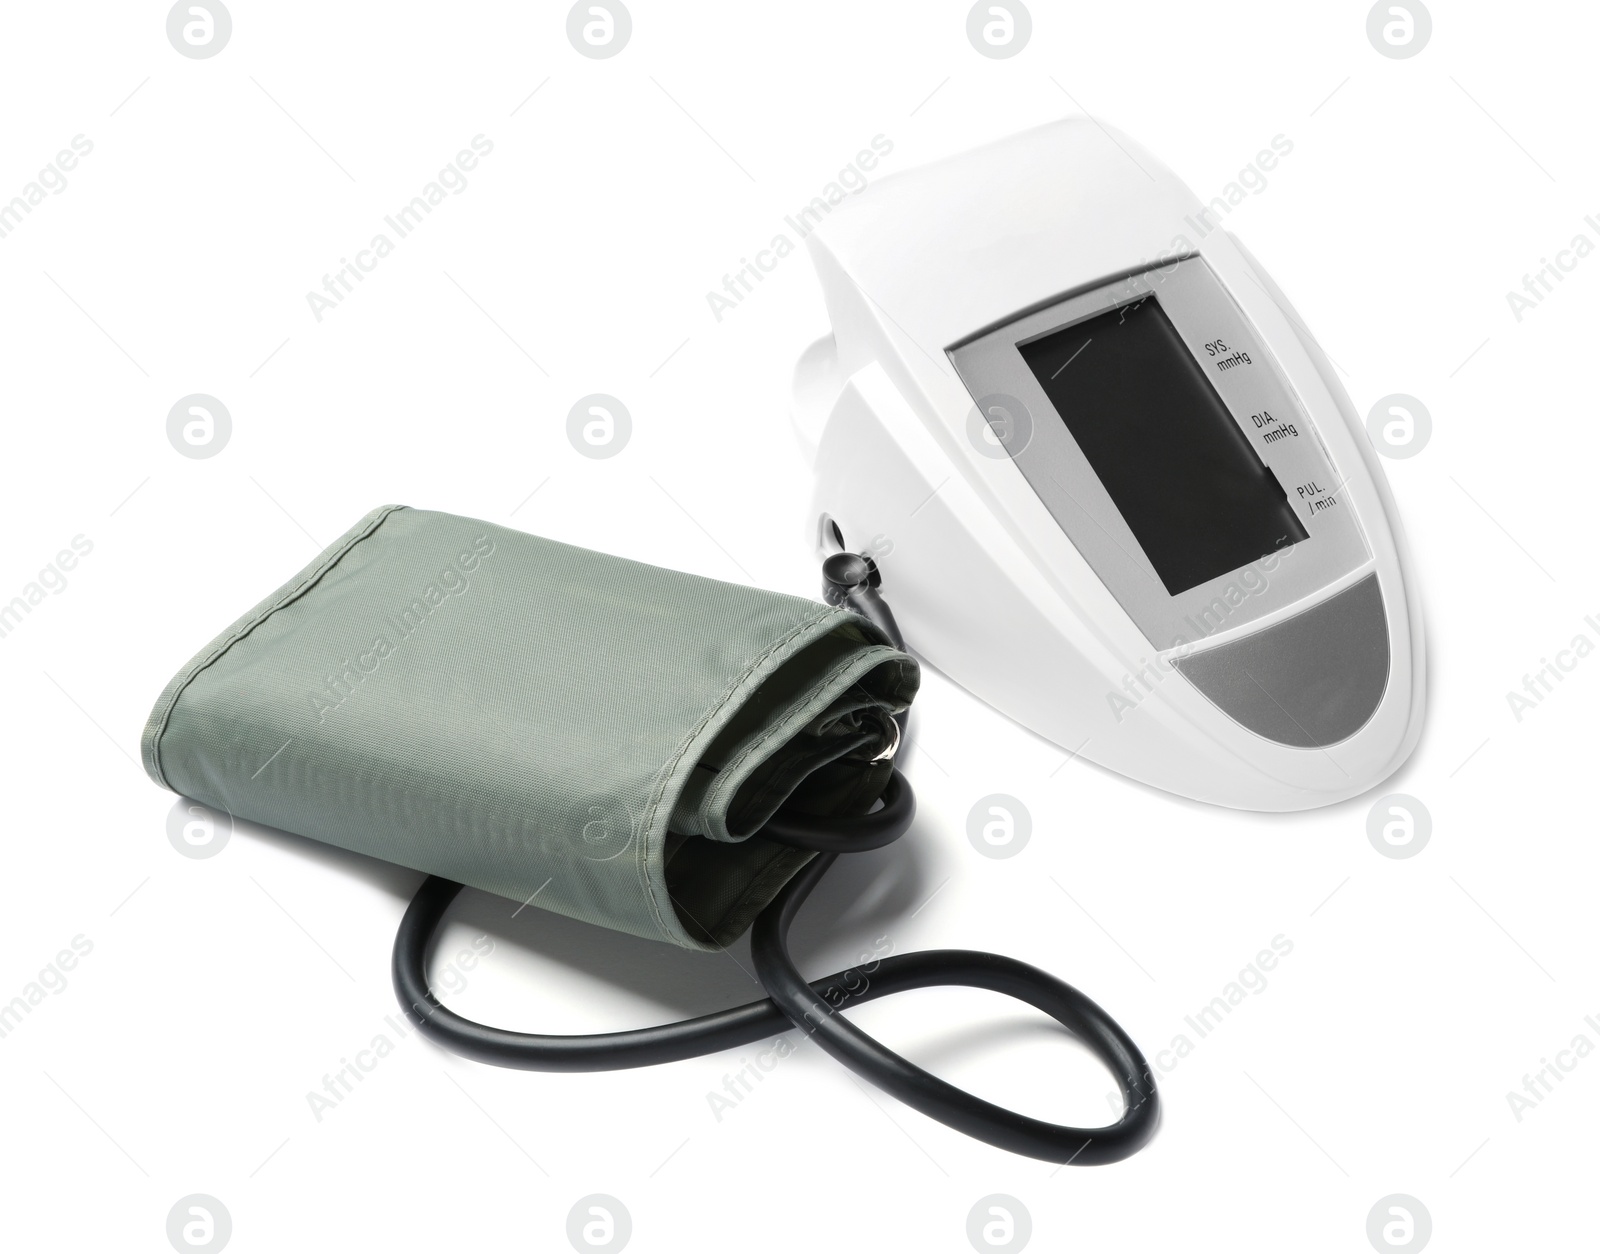 Photo of Modern digital sphygmomanometer for measuring blood pressure and checking pulse on white background